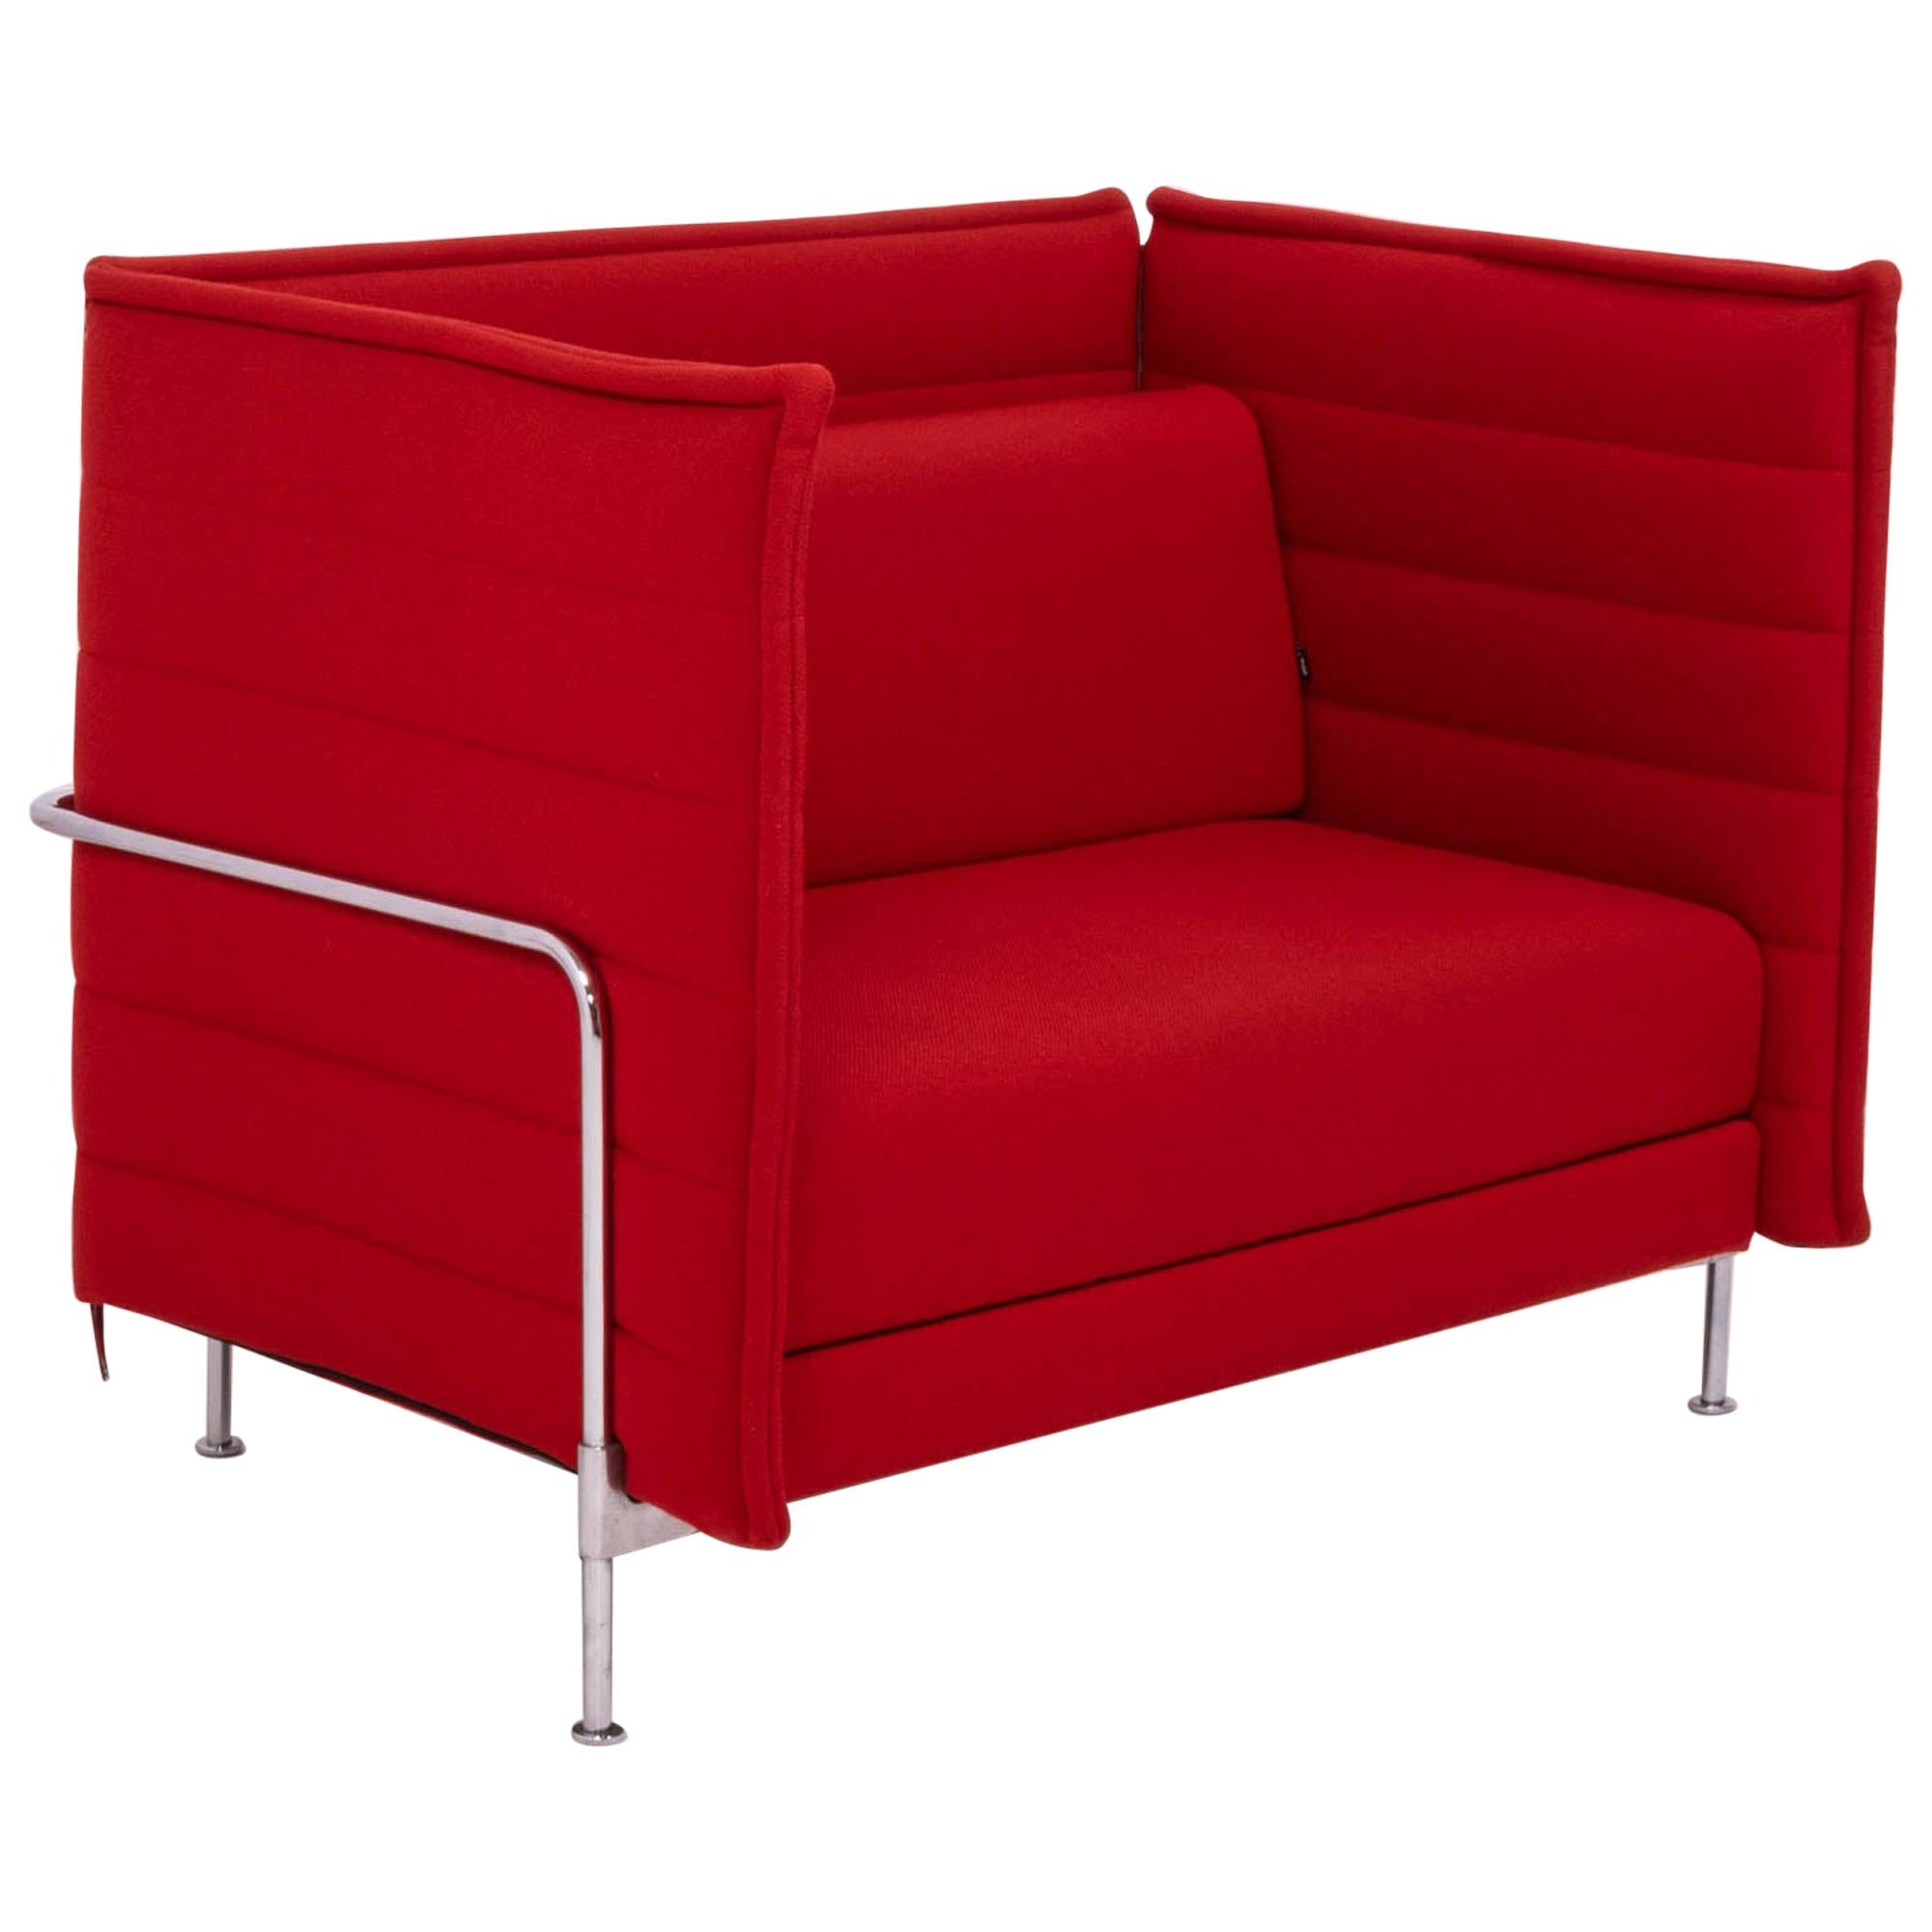 Designed by Ronan & Erwan Bouroullec in 2006, the set of two Vitra Alcove loveseats are an architectural piece of furniture, allowing for small spaces to be created.

Constructed with a tubular steel frame, these sofas are upholstered in vibrant